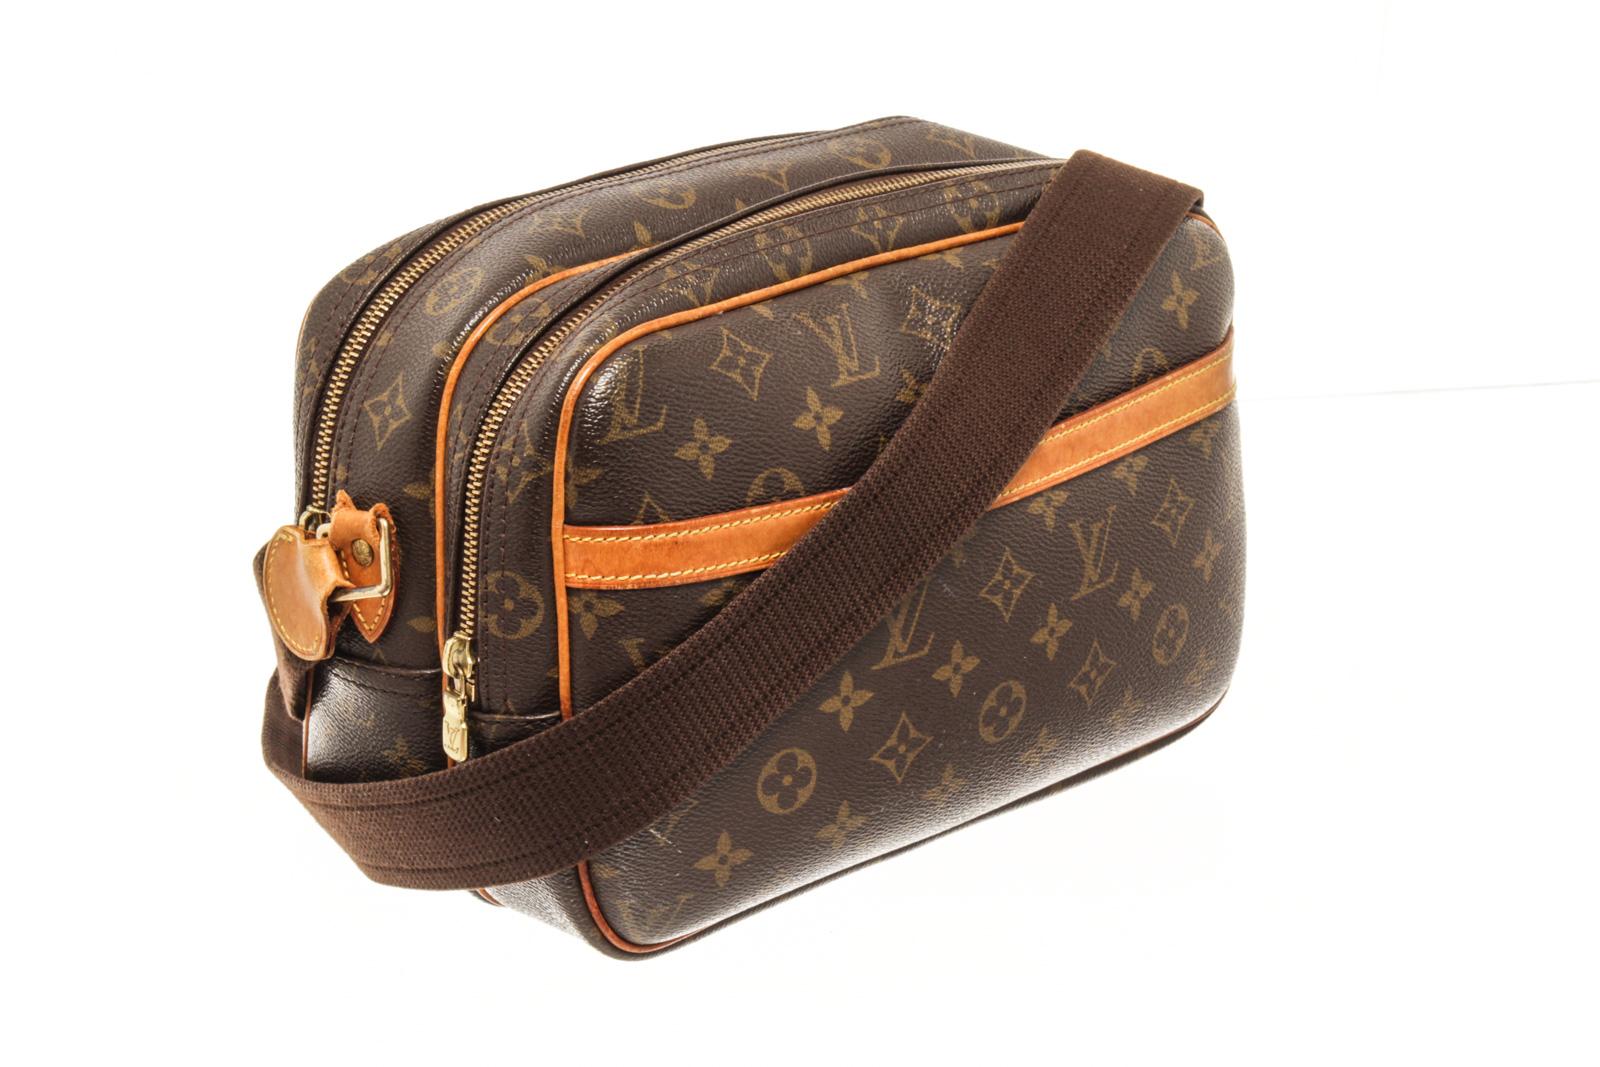 Louis Vuitton Brown Monogram Canvas Reporter PM Crossbody Bag with shoulder strap, exterior pocket, two zipper compartments, canvas lining, gold tone hardware, zipper closure. There are some stains on the canvas lining. 

86663MSC